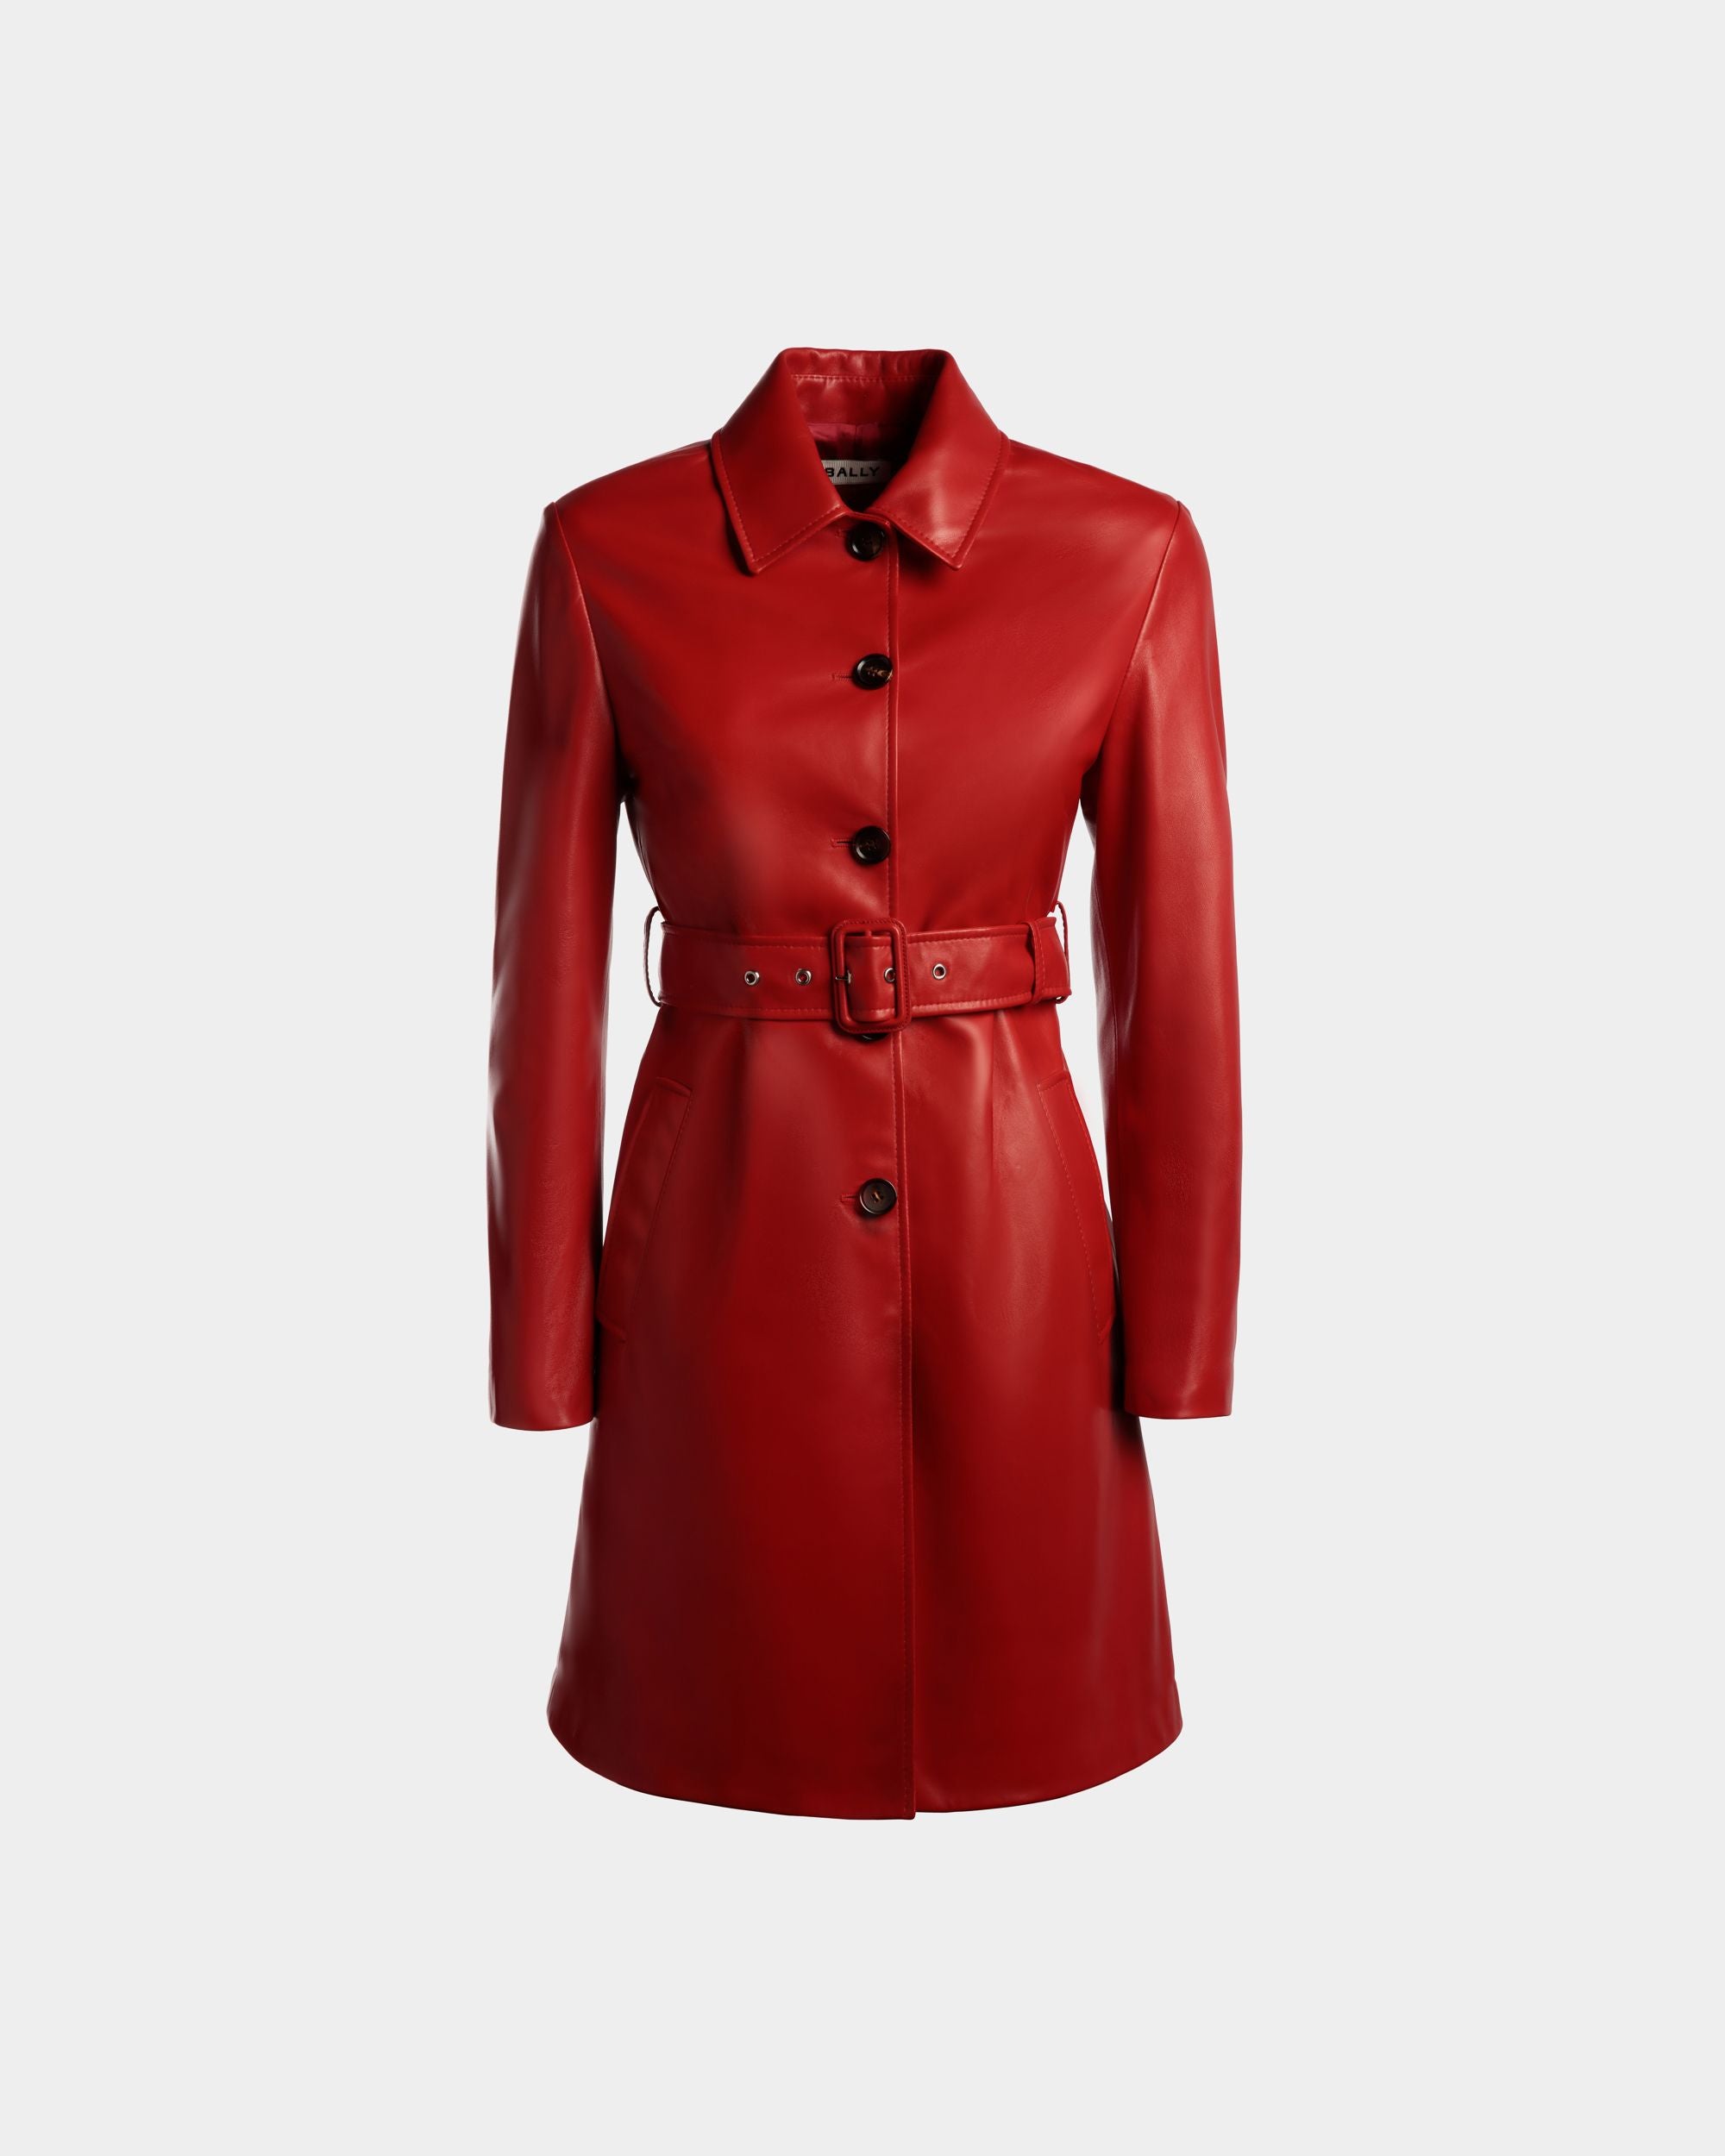 Women's Belted Midi Coat in Candy Red Leather | Bally | Still Life Front